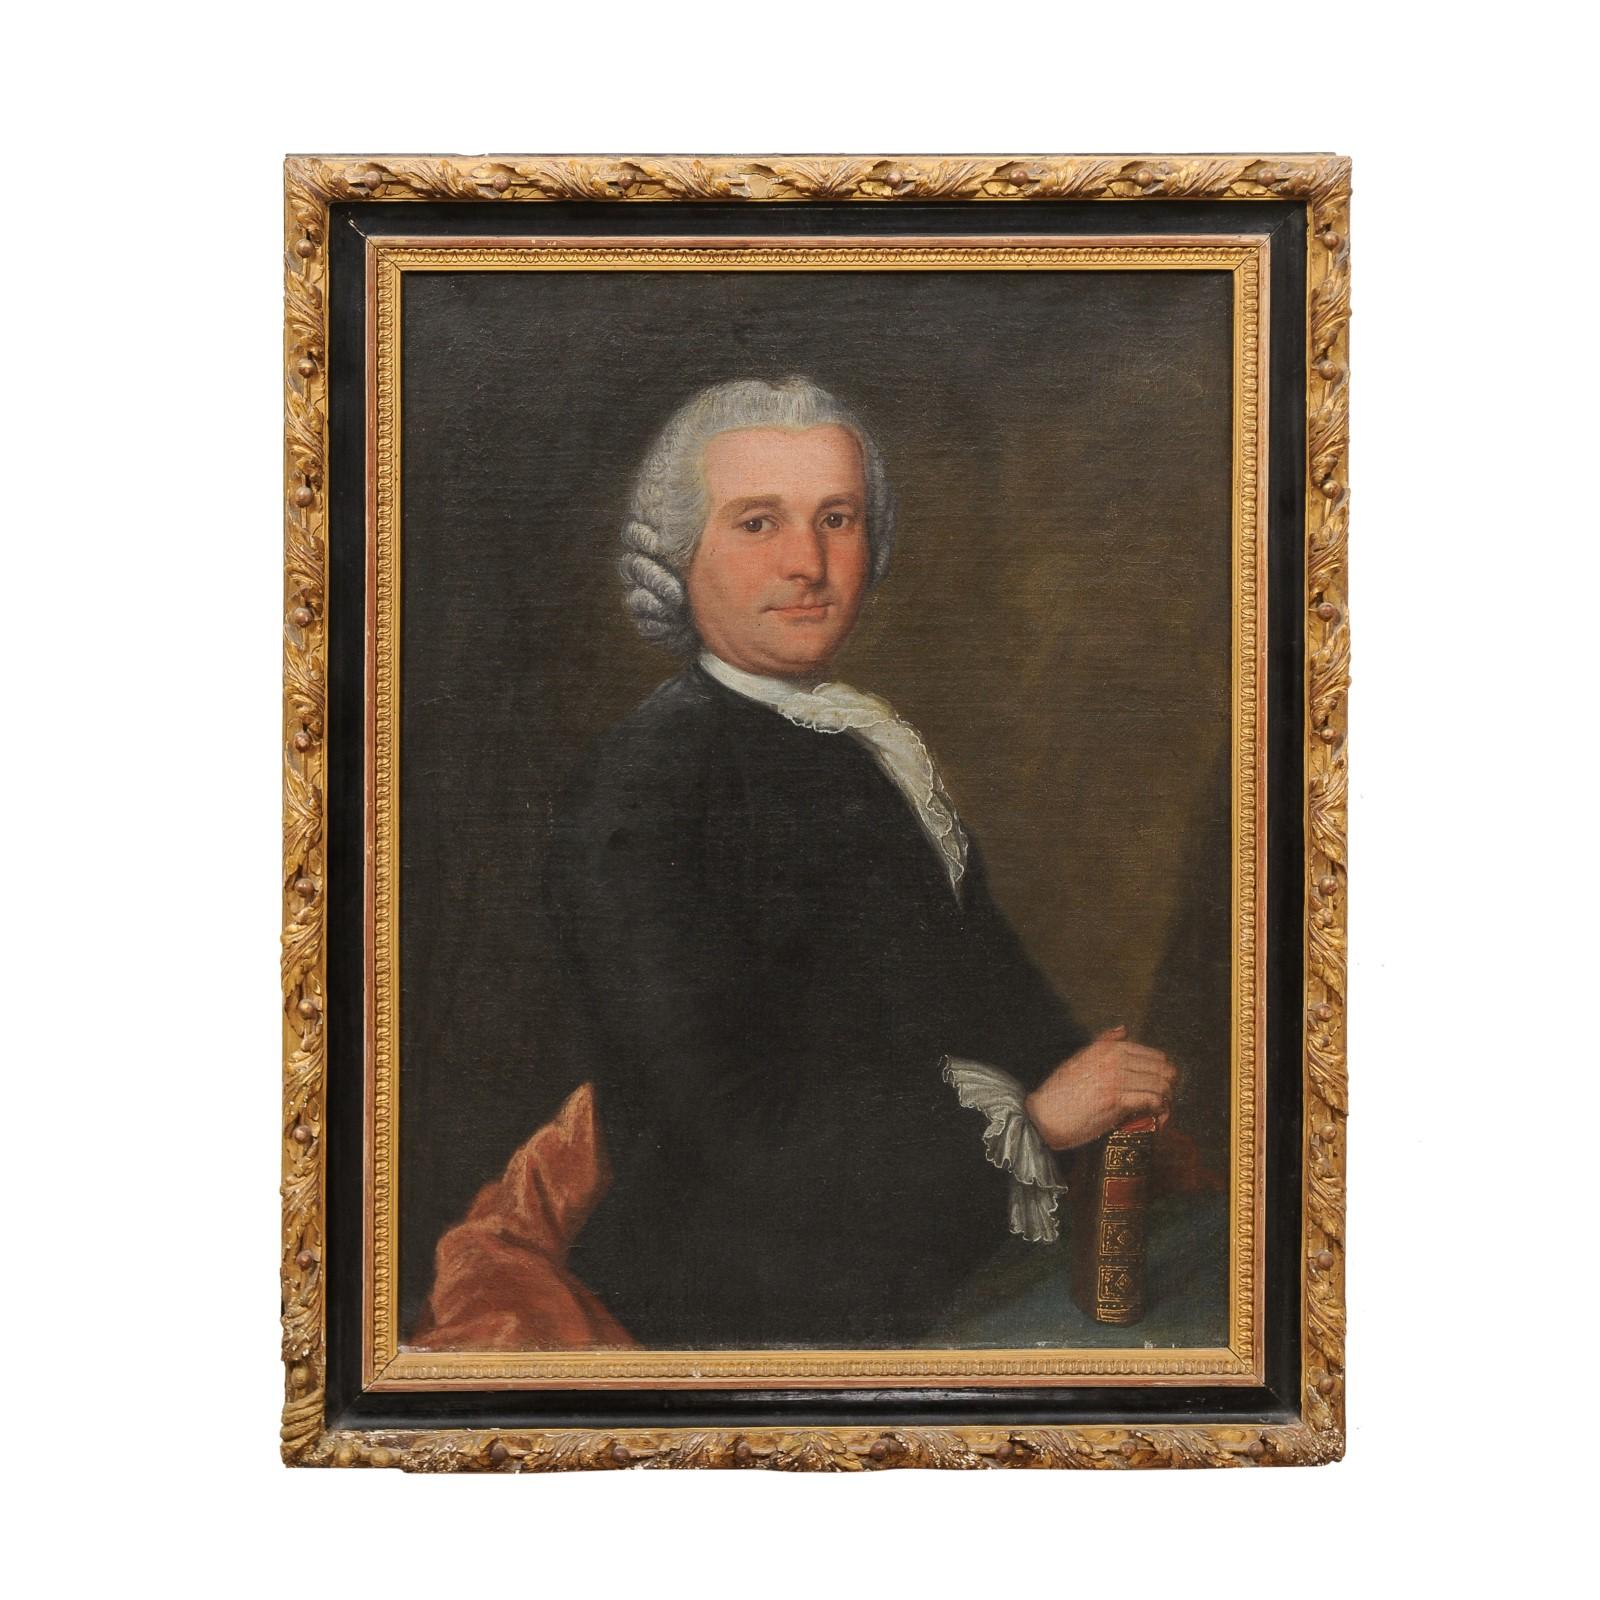 18th Century Oil on Canvas Portrait of a Gentleman in Gilt Frame, England
